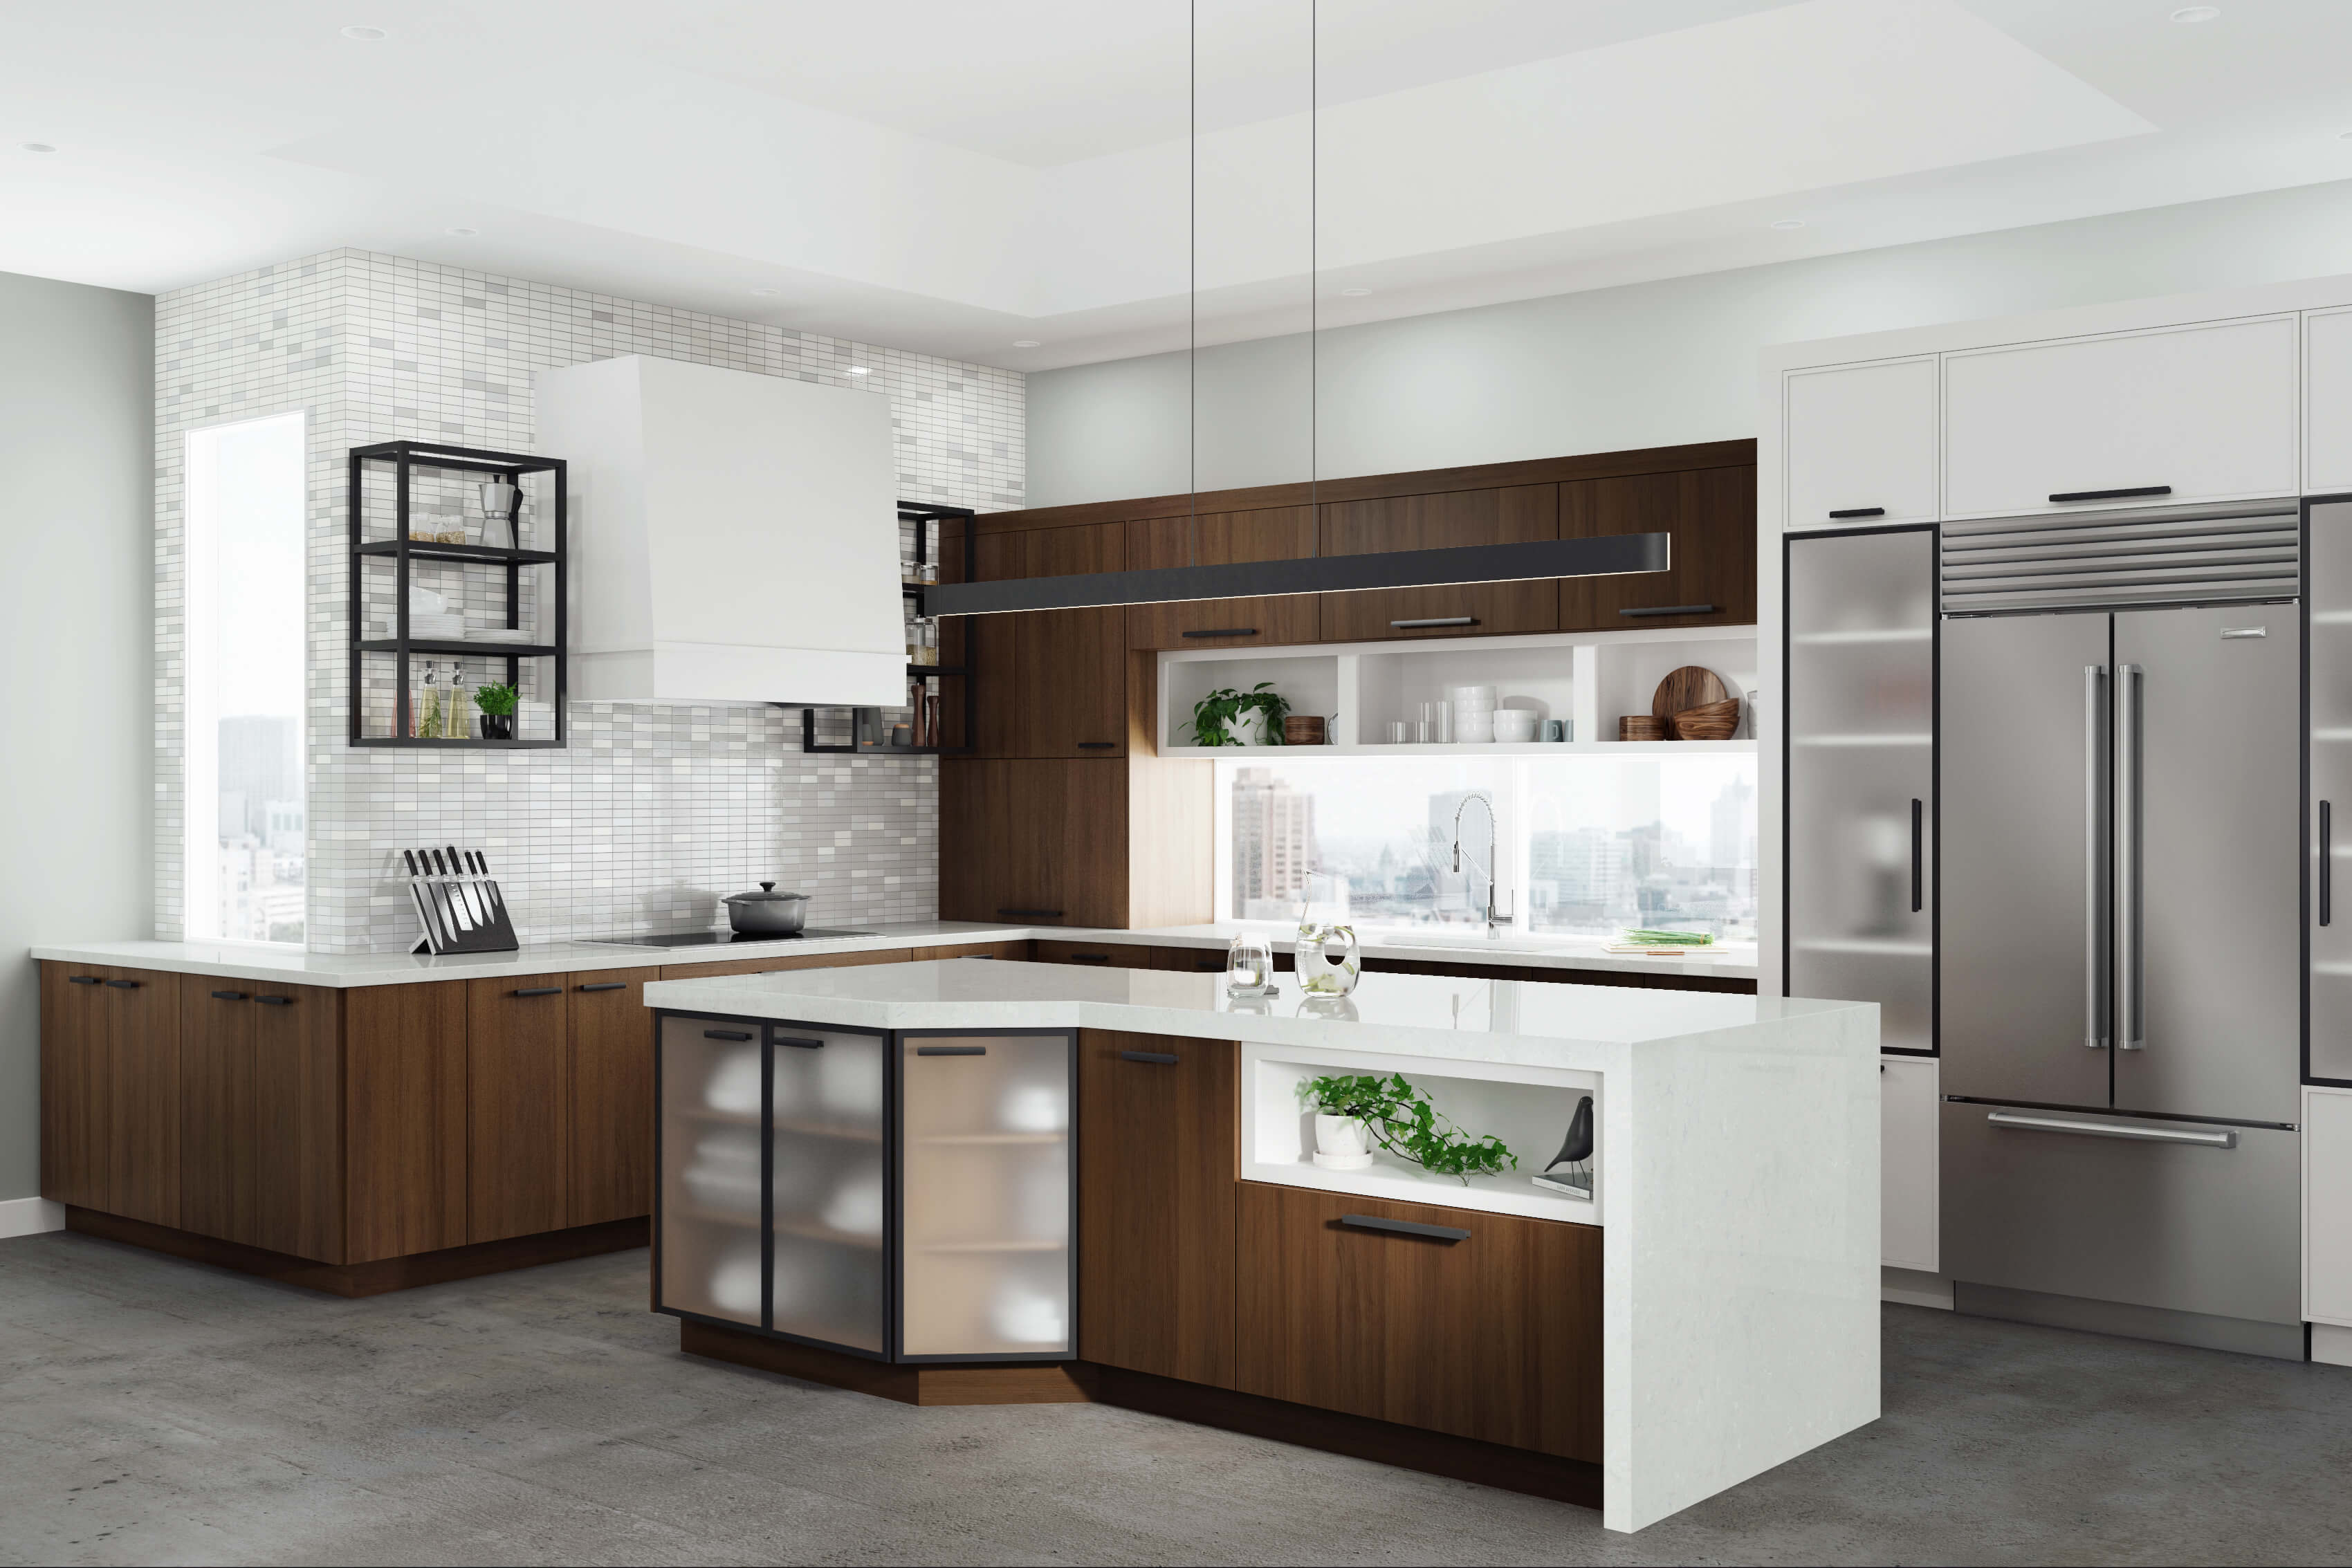 A urban city loft kitchen with walnut cabinets, a white painted modern wood hood, matte black metal cabinet doors, and floating shelves create an industrial look.